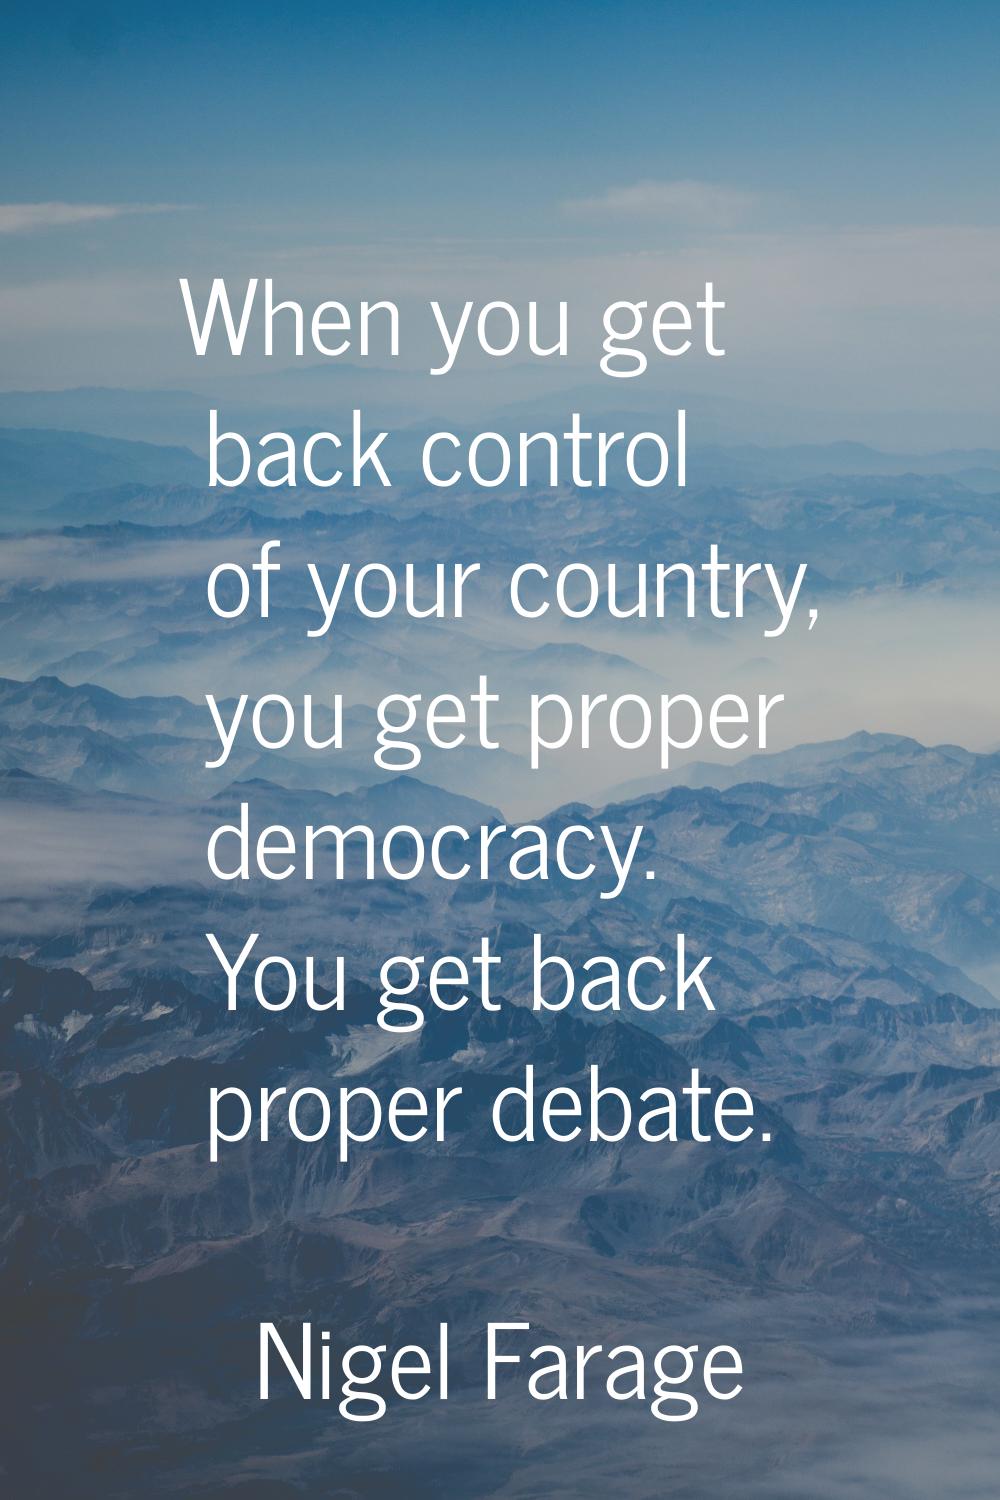 When you get back control of your country, you get proper democracy. You get back proper debate.